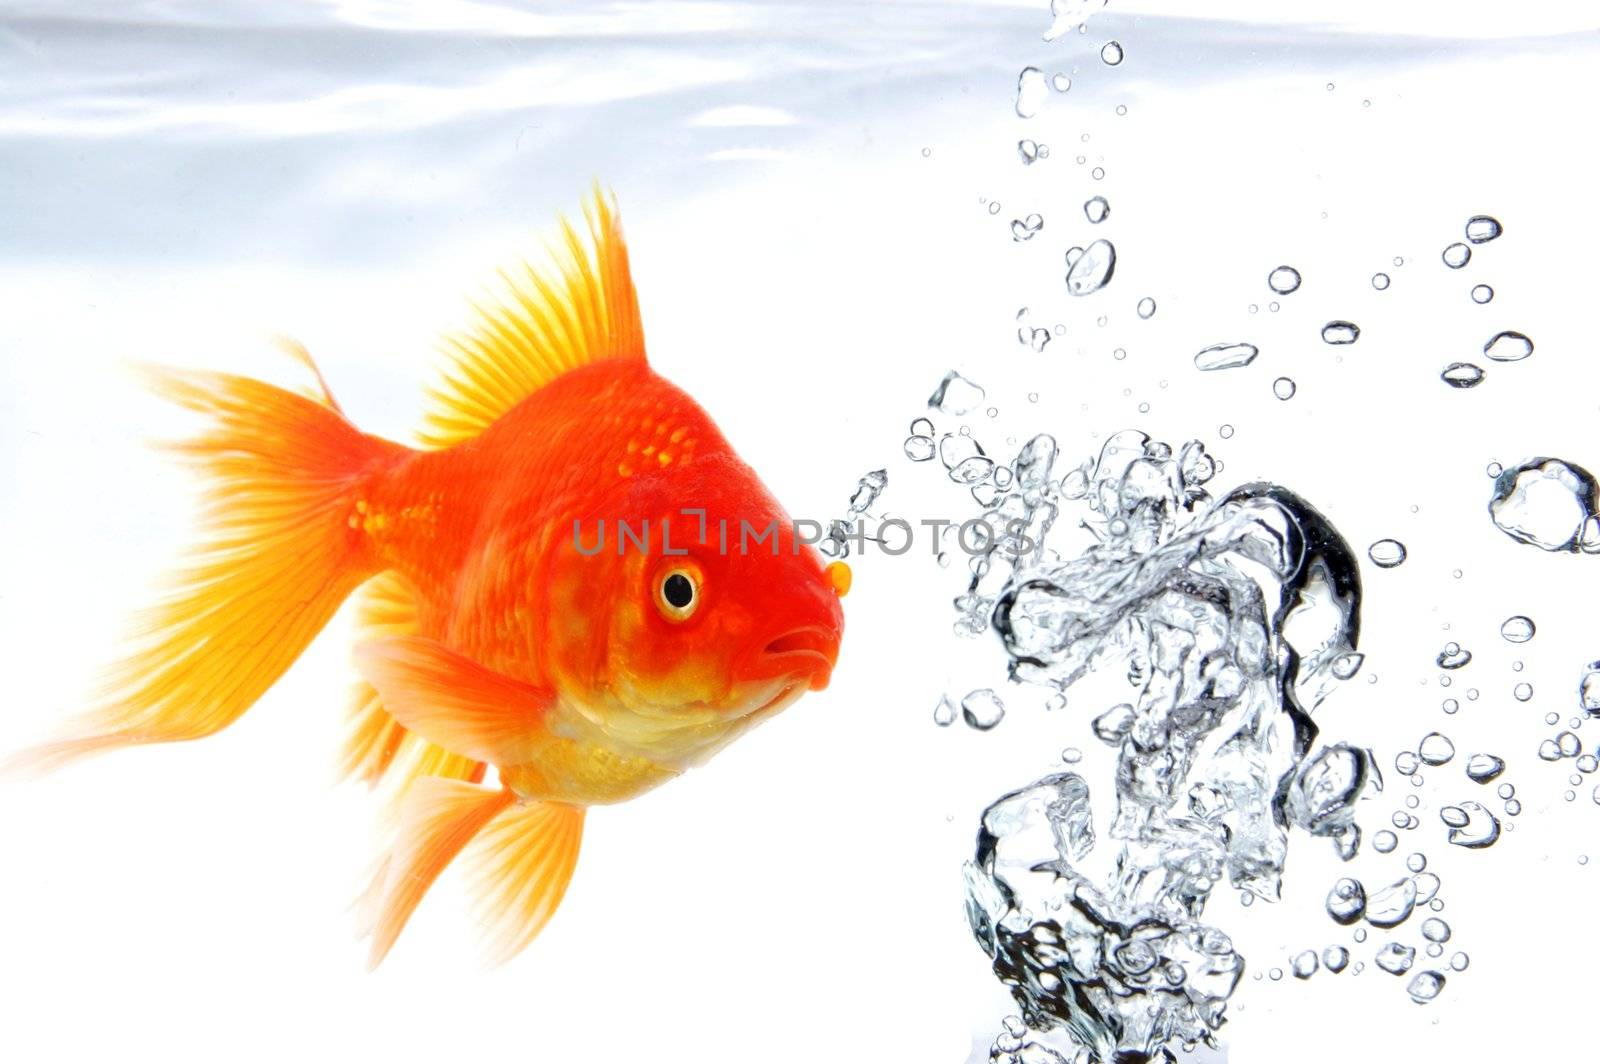 goldfish swimming in water or fishtank with air bubbles